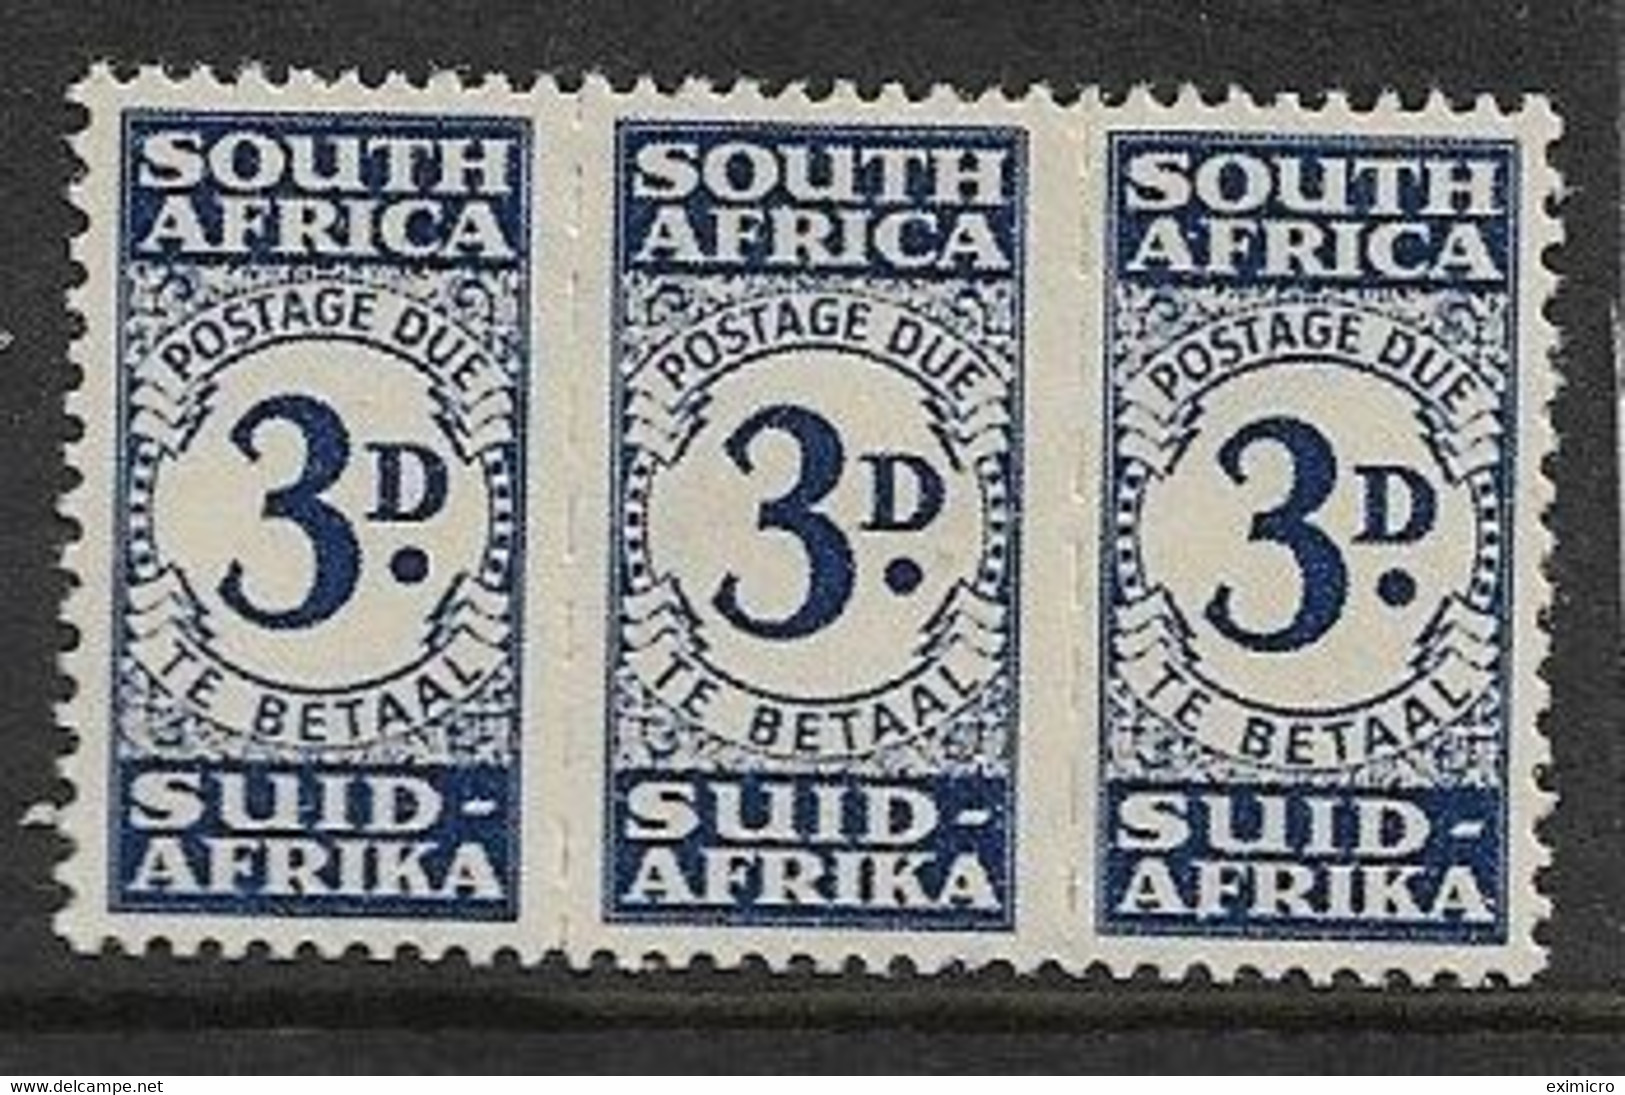 SOUTH AFRICA 1943 - 1944 3d POSTAGE DUE SG D33 MOUNTED MINT TOP VALUE OF THE SET Cat £75 - Impuestos